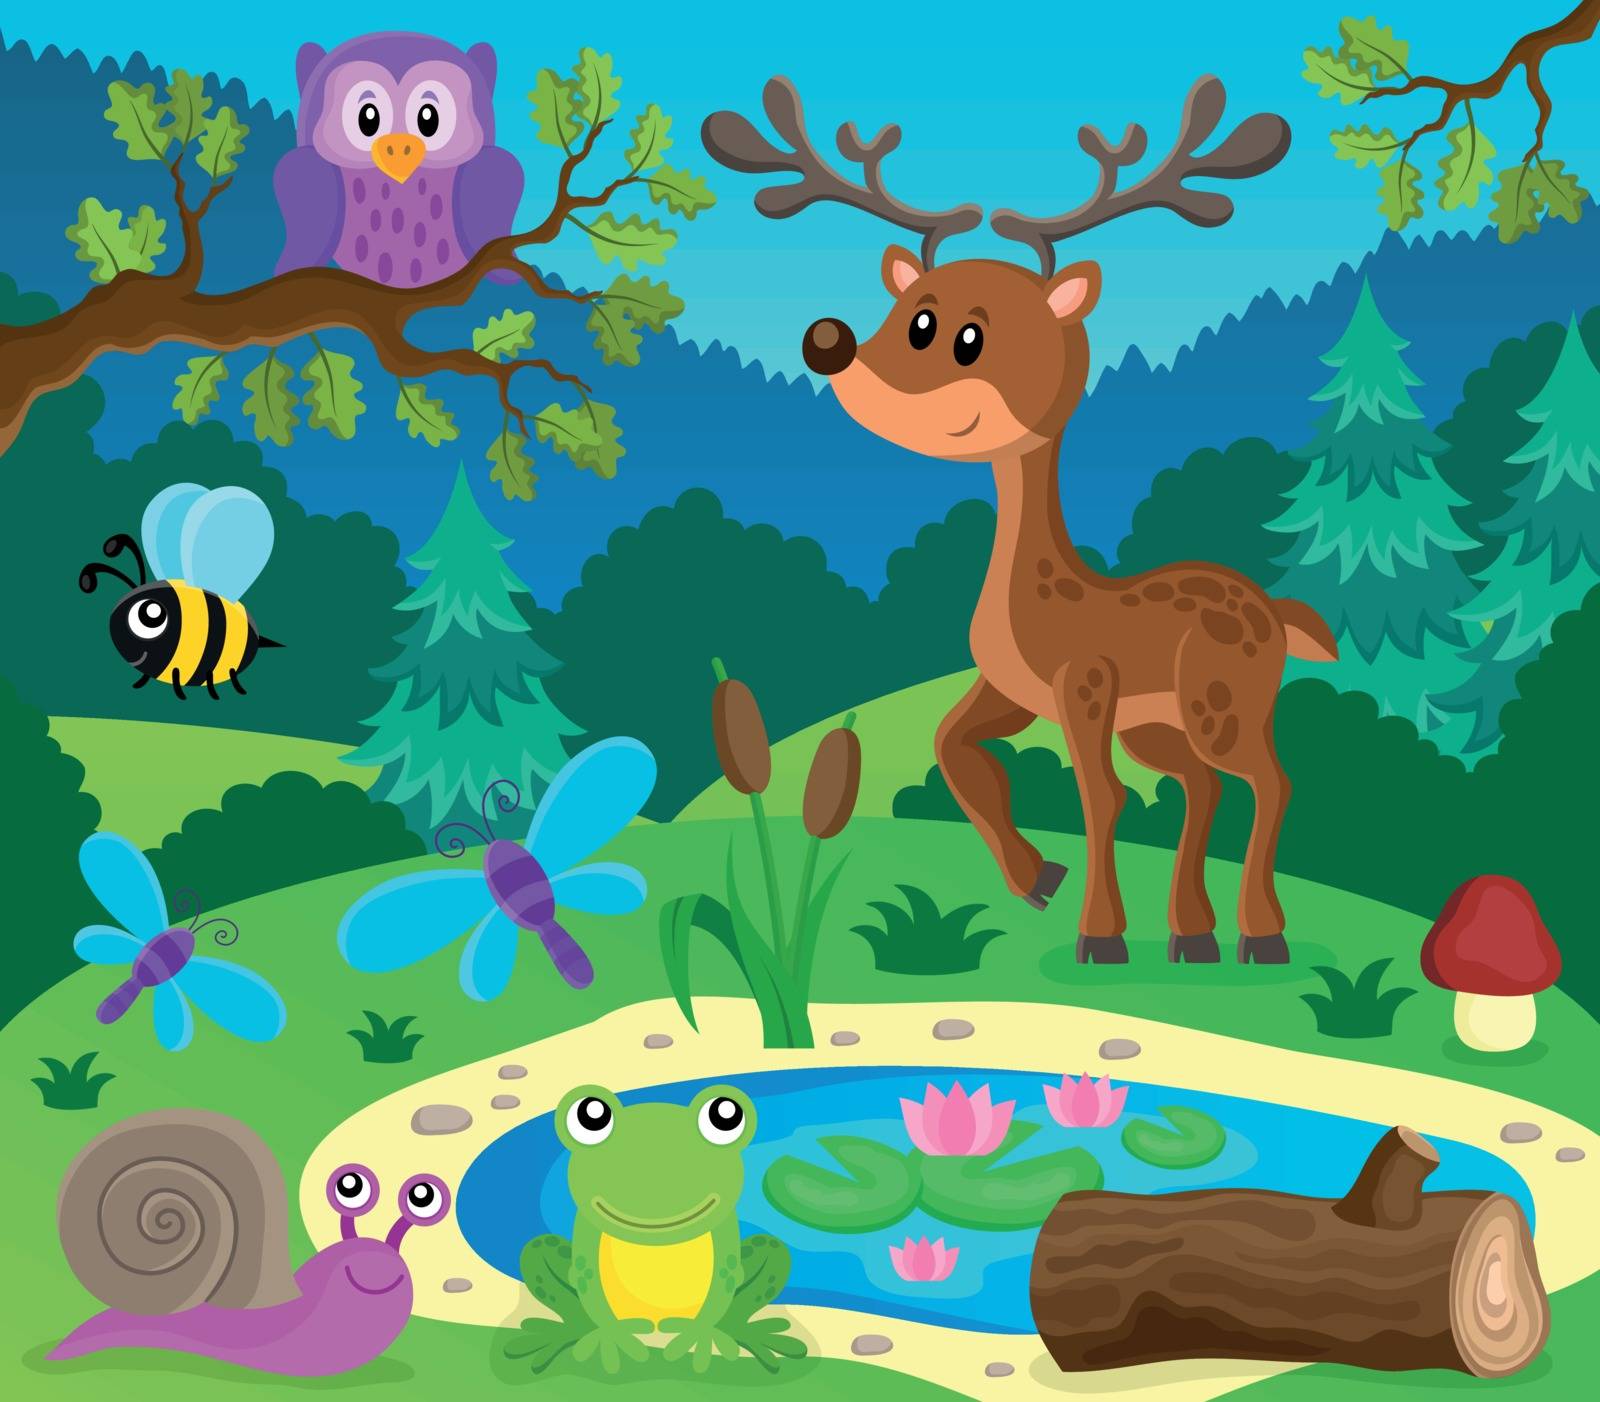 Forest animals topic image 9 - eps10 vector illustration.